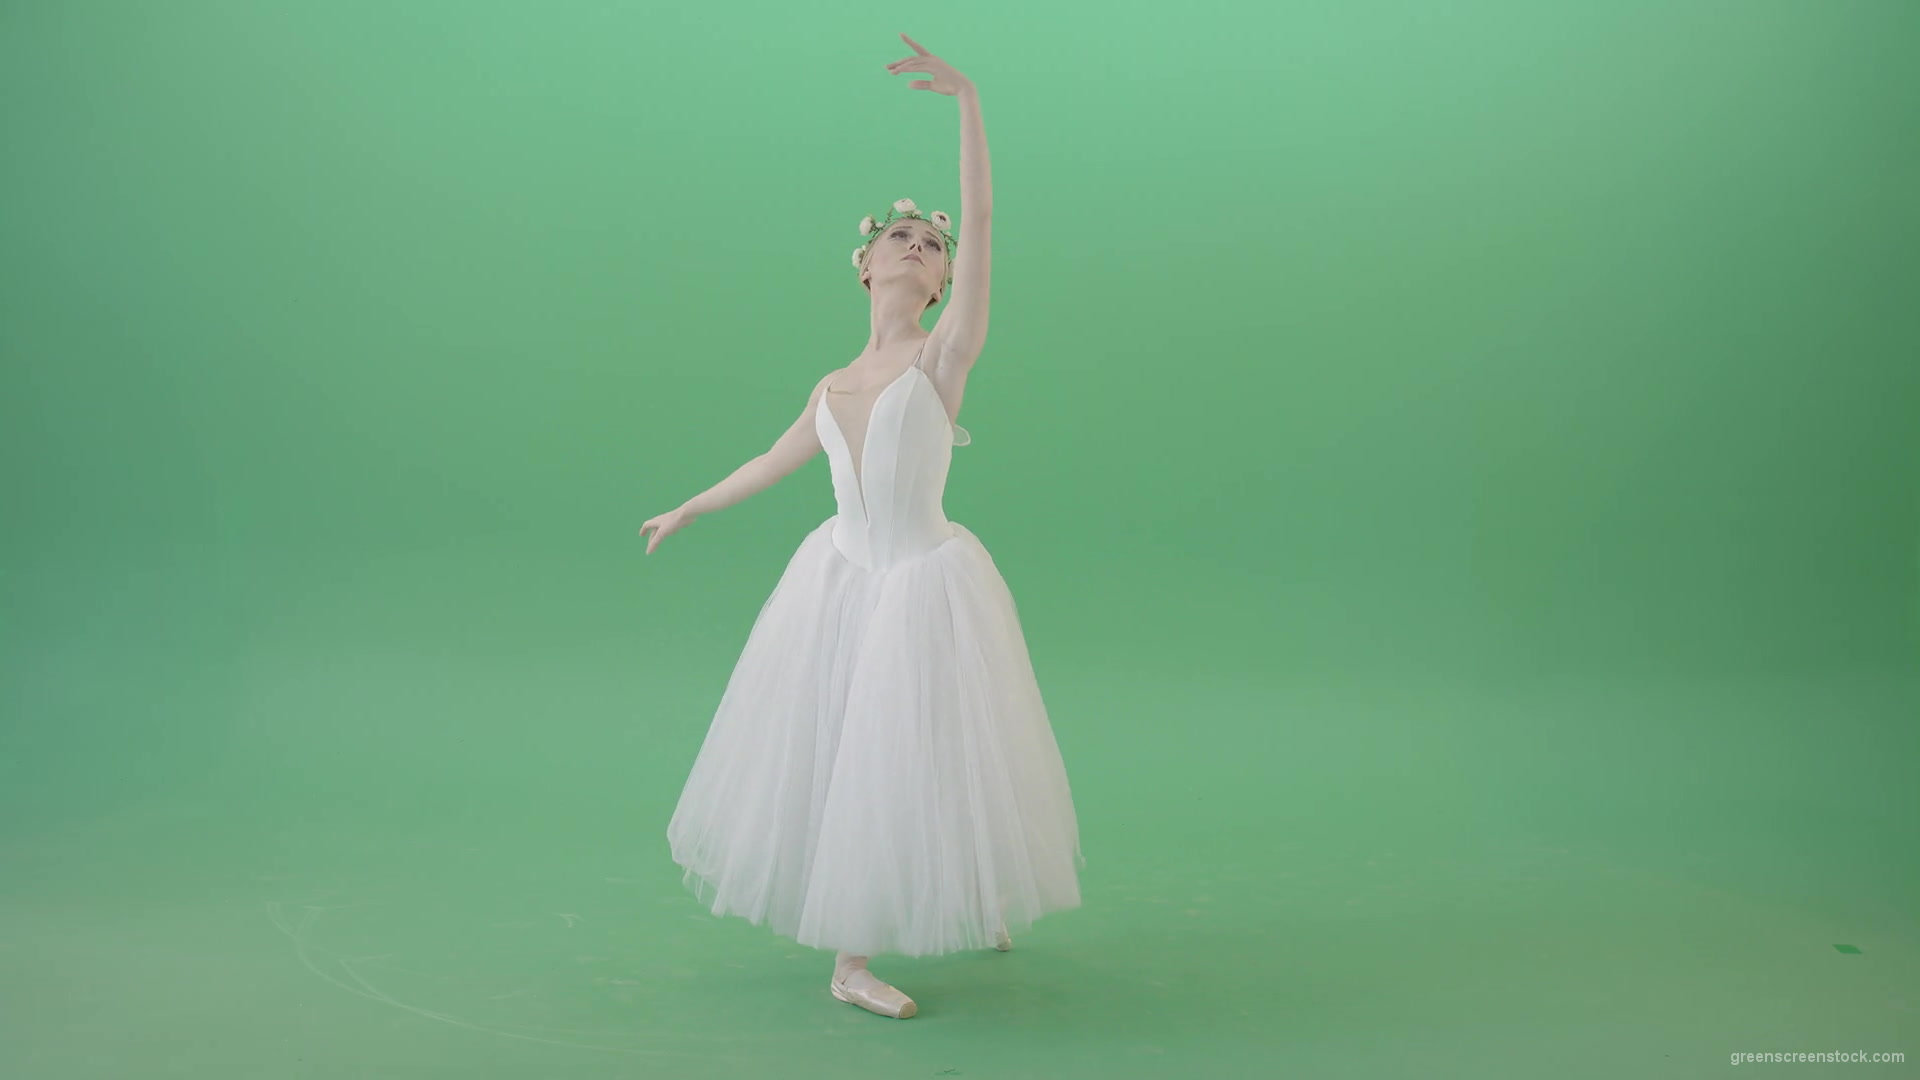 Sensuality-Choreographer-making-regards-in-white-dress-amazing-ballet-girl-isolated-on-green-screen-4K-Video-Footage-1920_007 Green Screen Stock